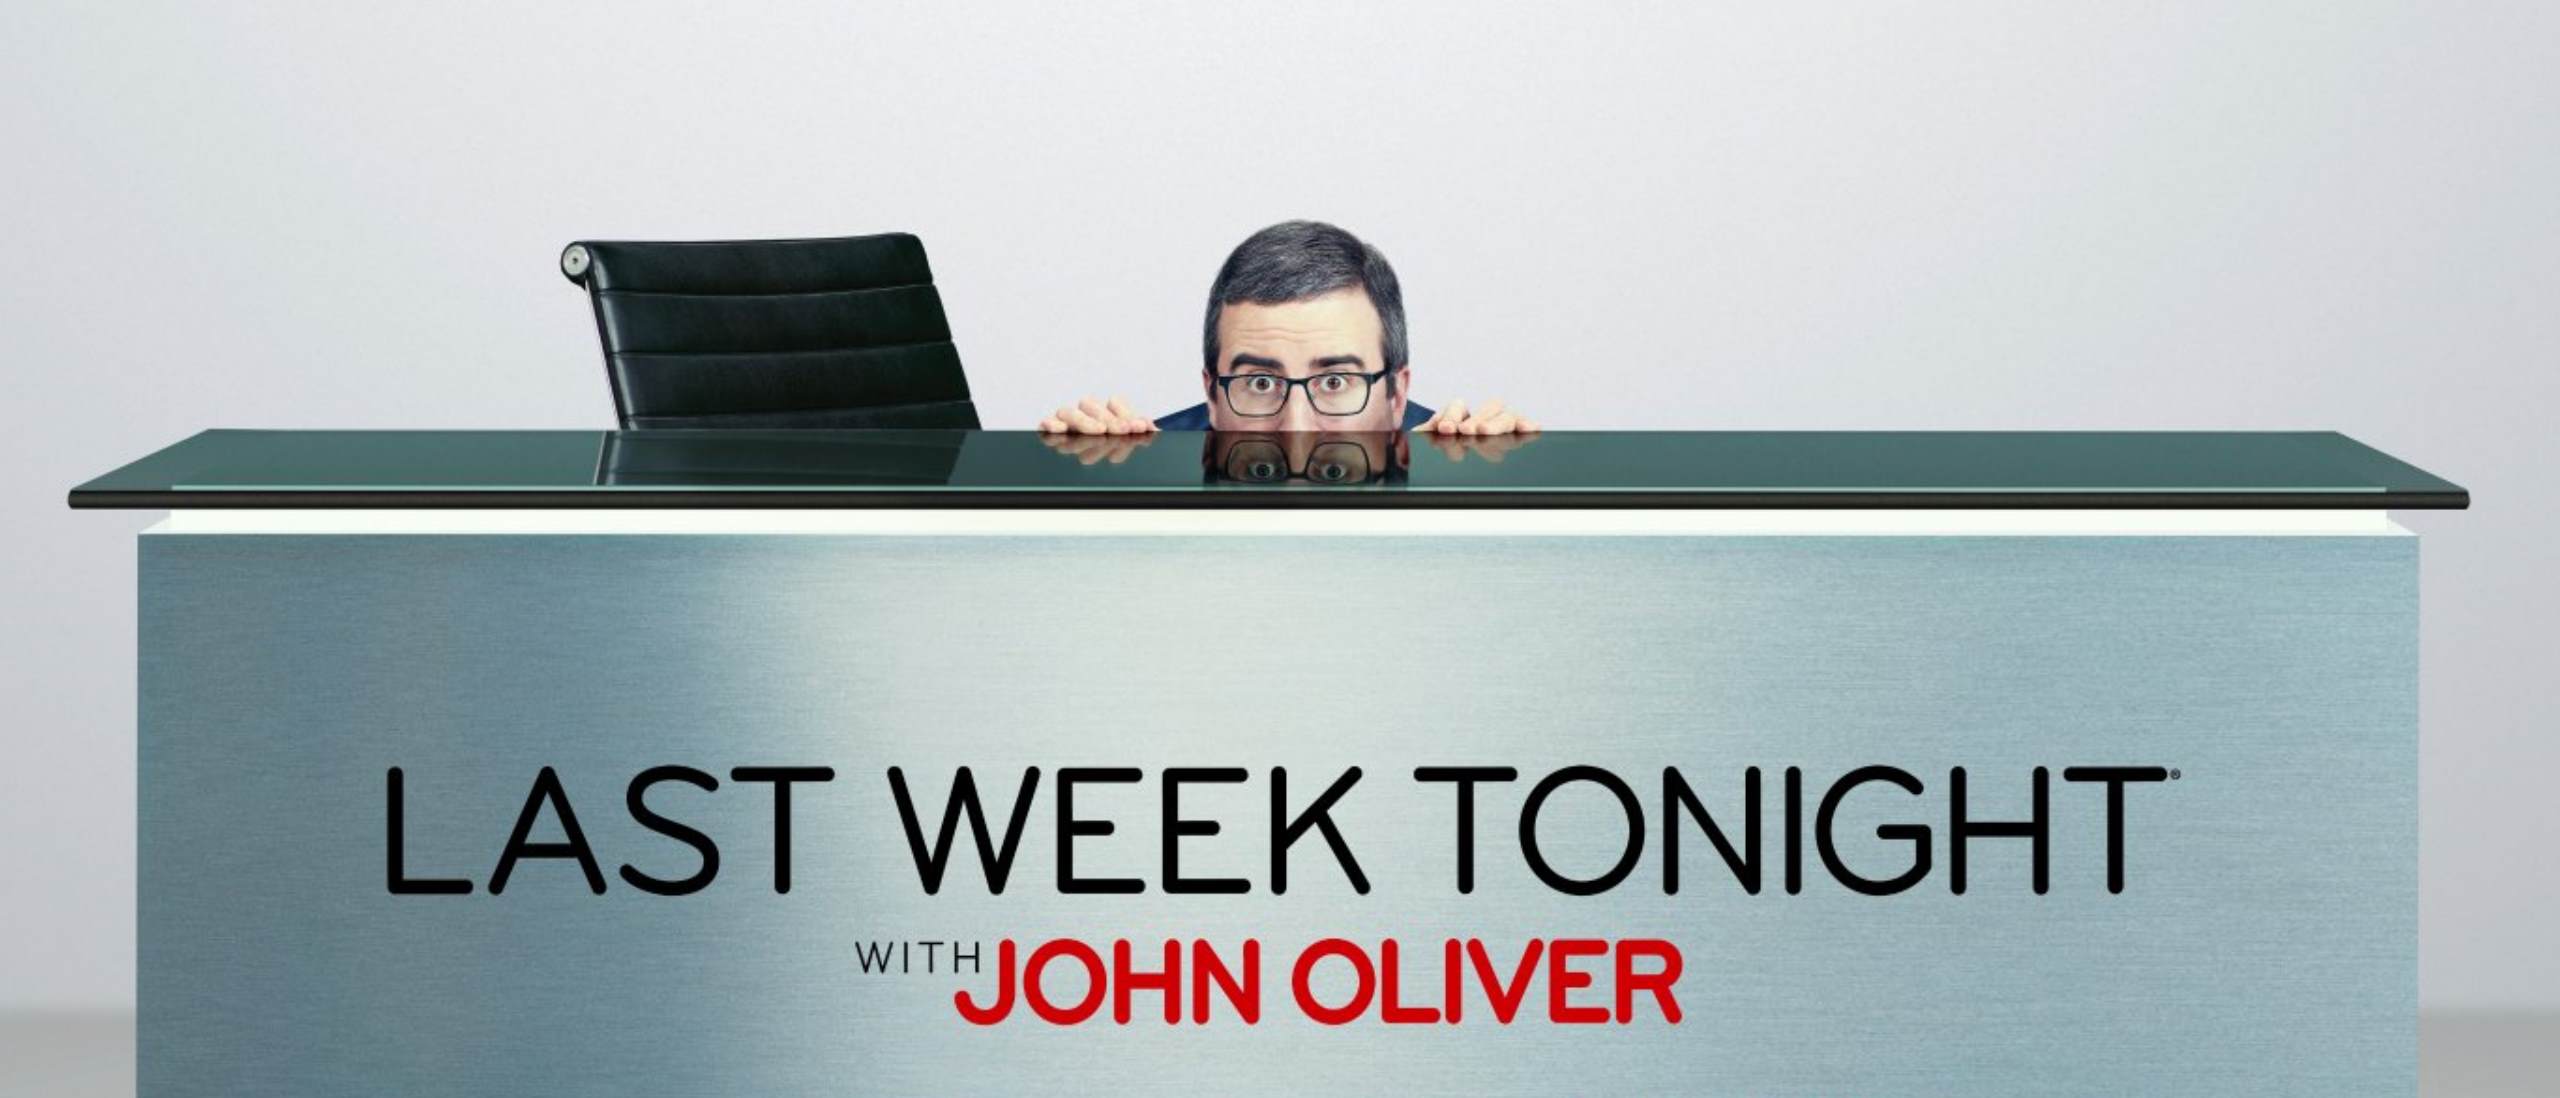 Last Week Tonight With John Oliver Season 2 17 Watch Here Without Ads And Downloads